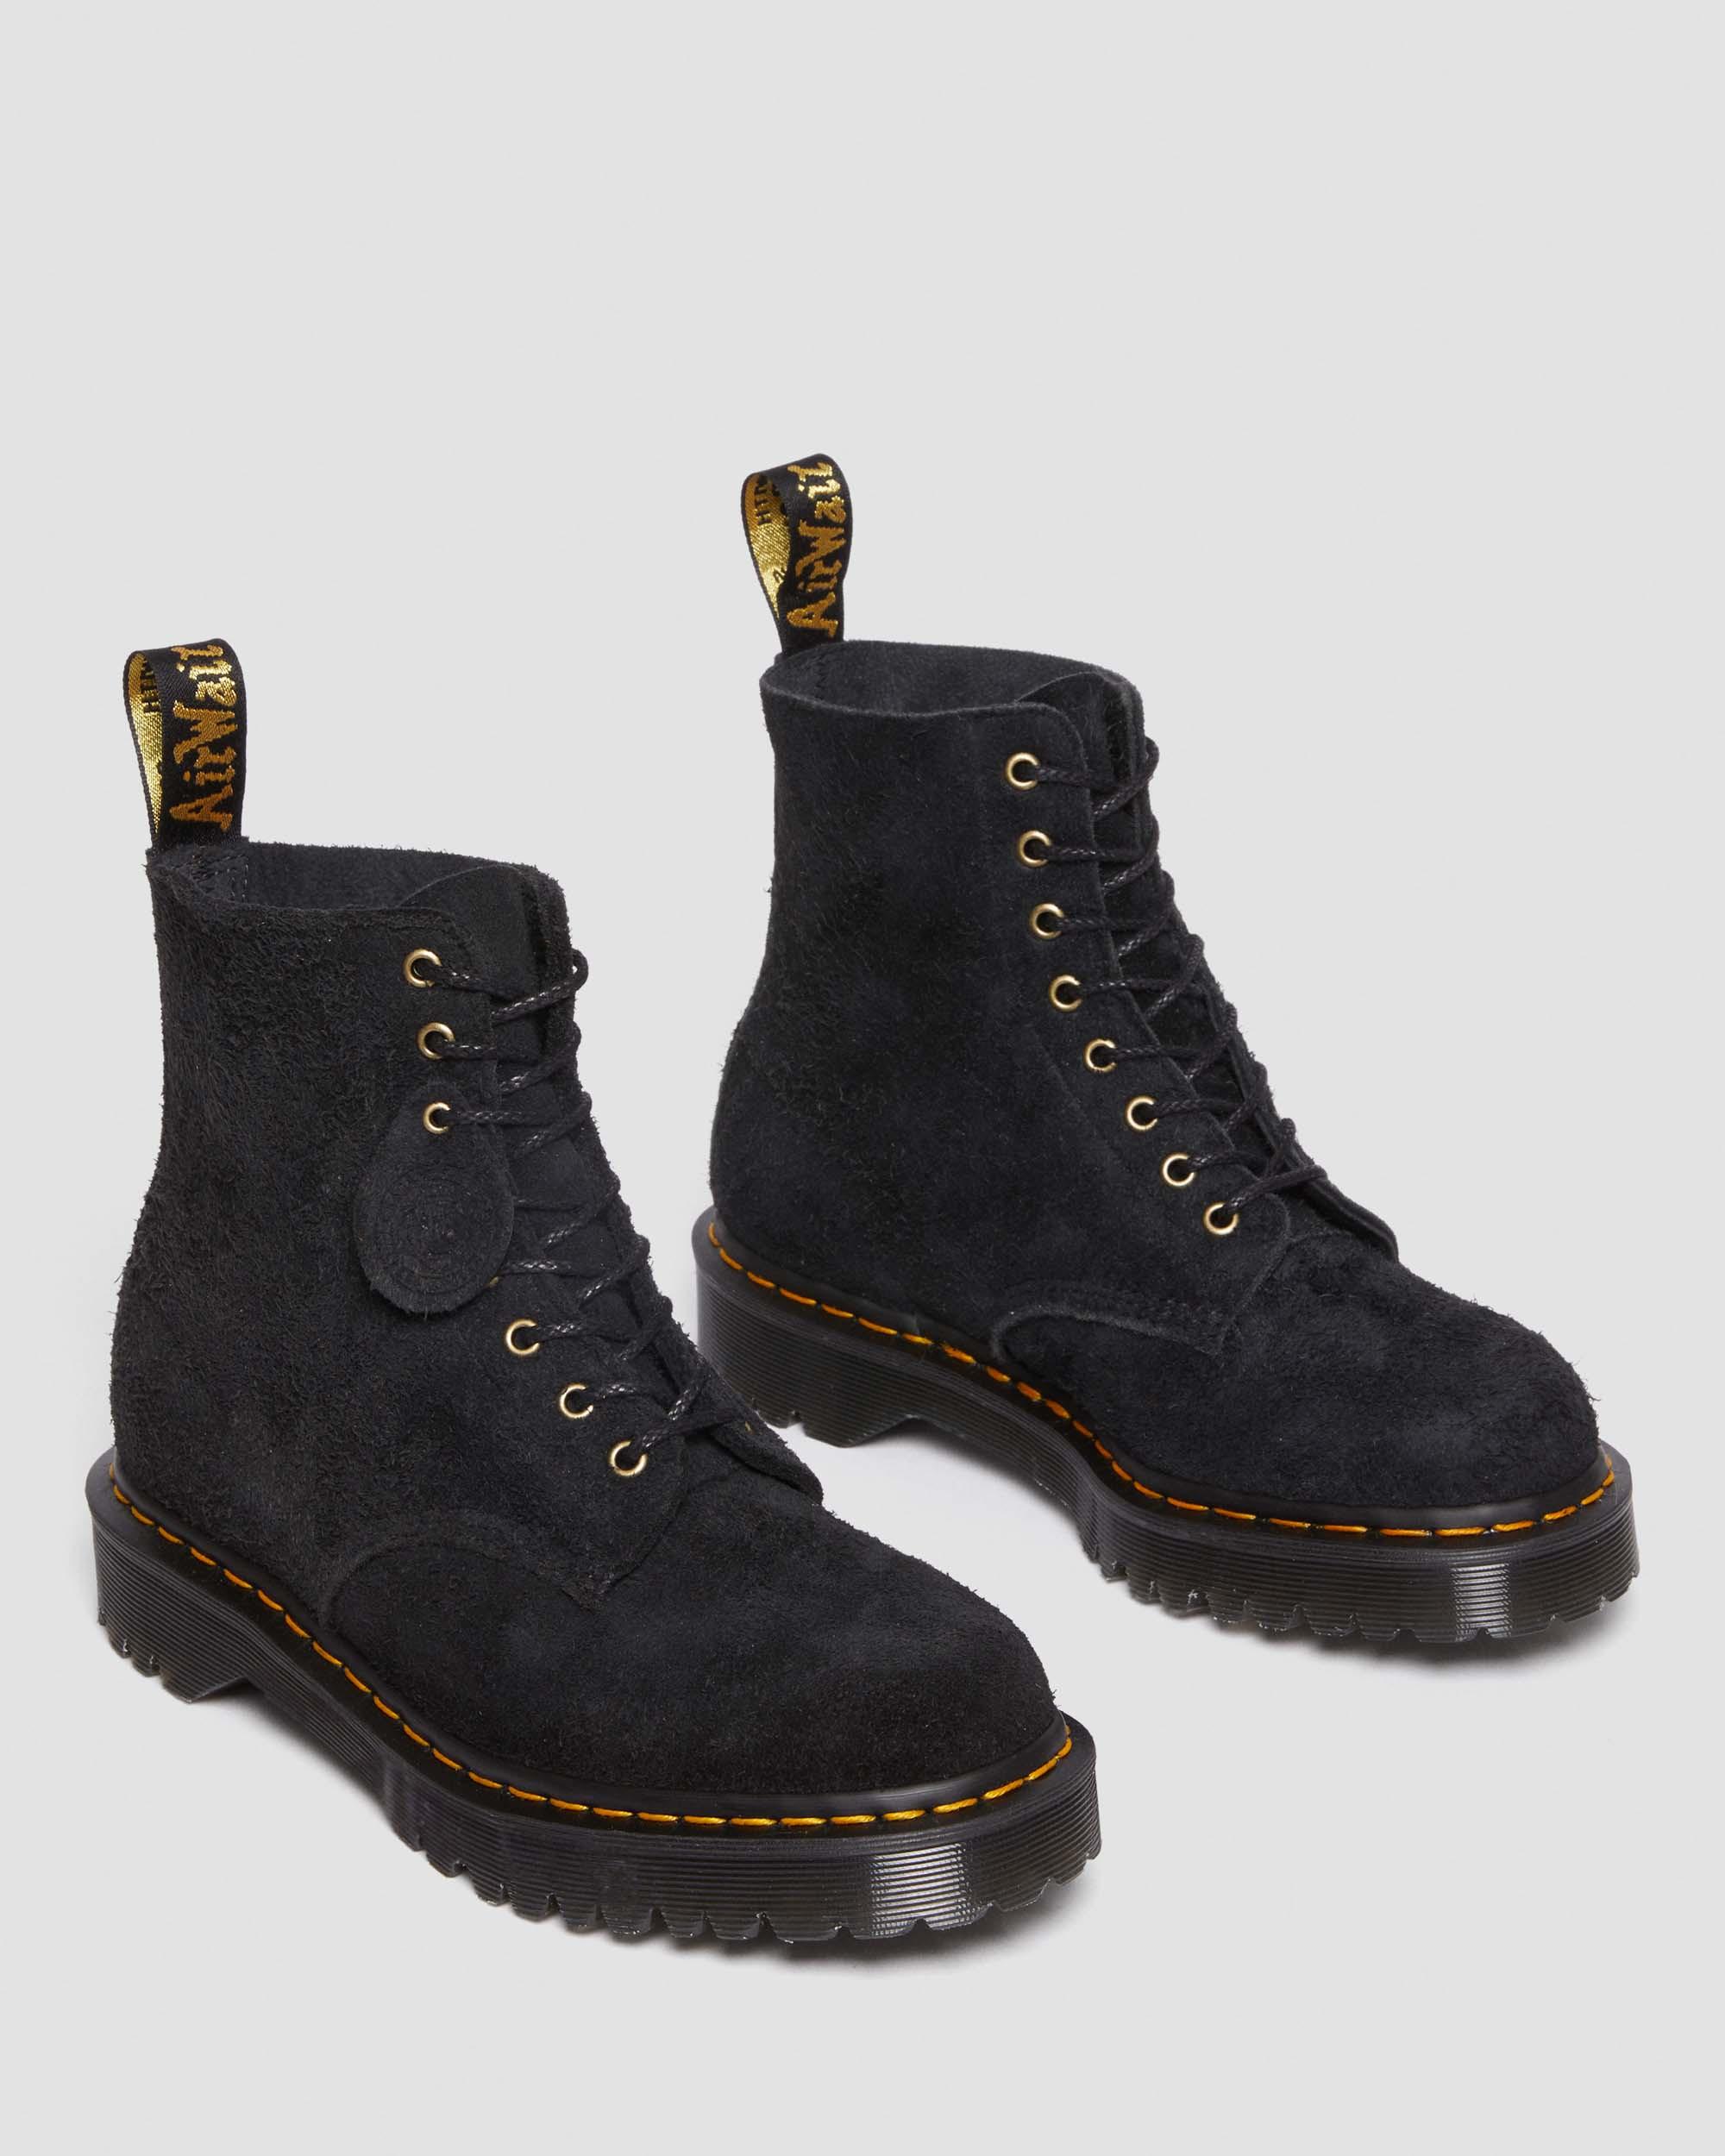 1460 Pascal Made in England Tufted Suède Veterlaarzen1460 Pascal Made in England Tufted Suède Veterlaarzen Dr. Martens